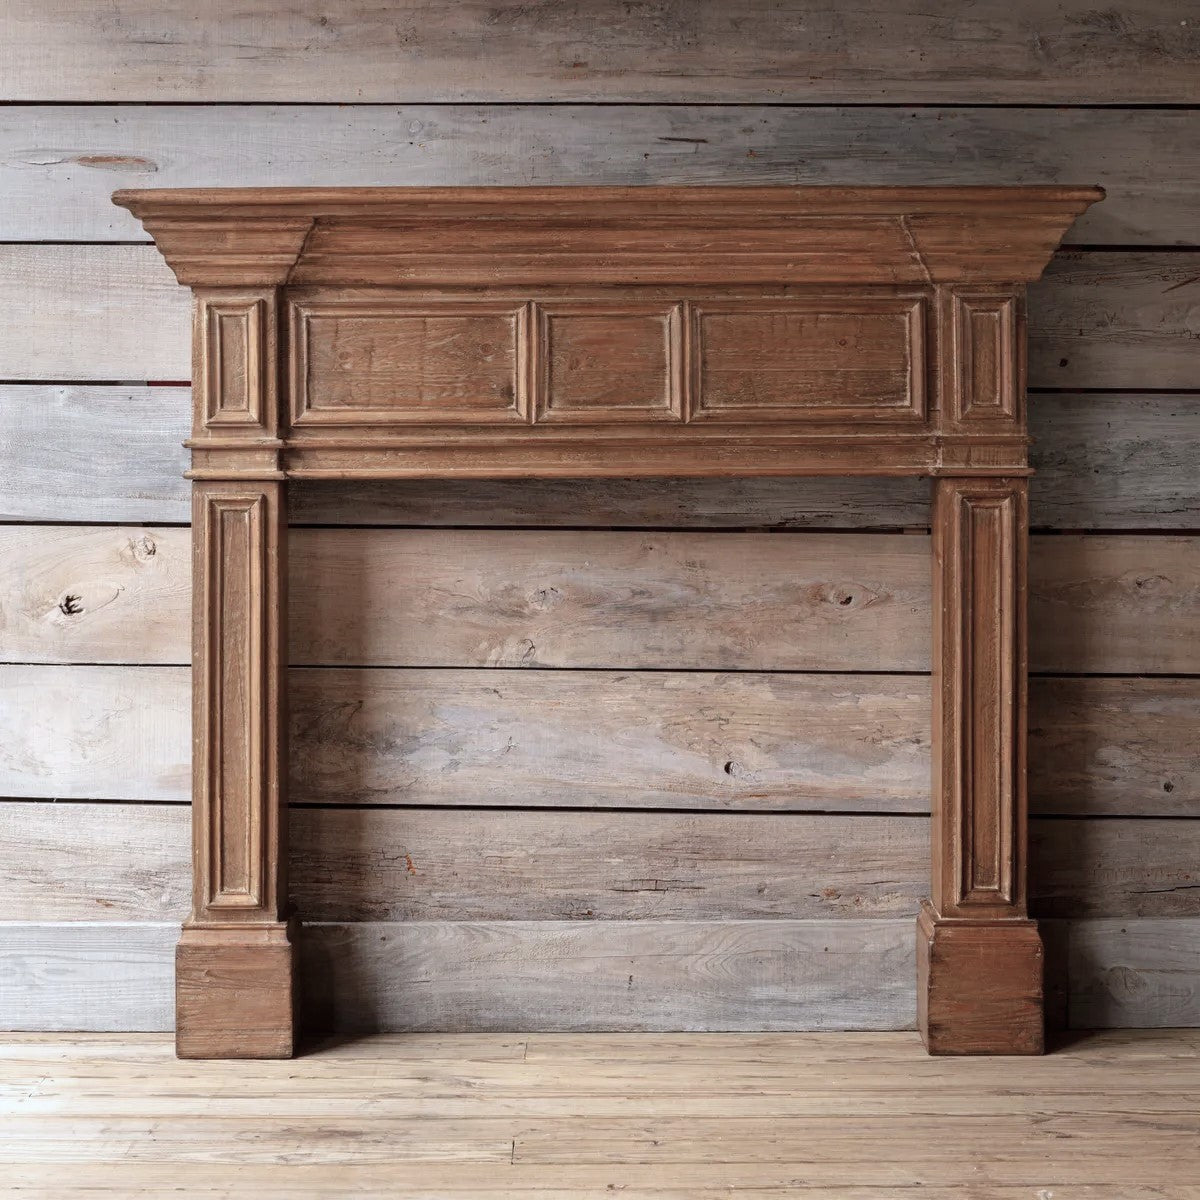 Reclaimed Wood Fireplace Mantels for sale, Wooden Vintage Fireplace Mantels for sale